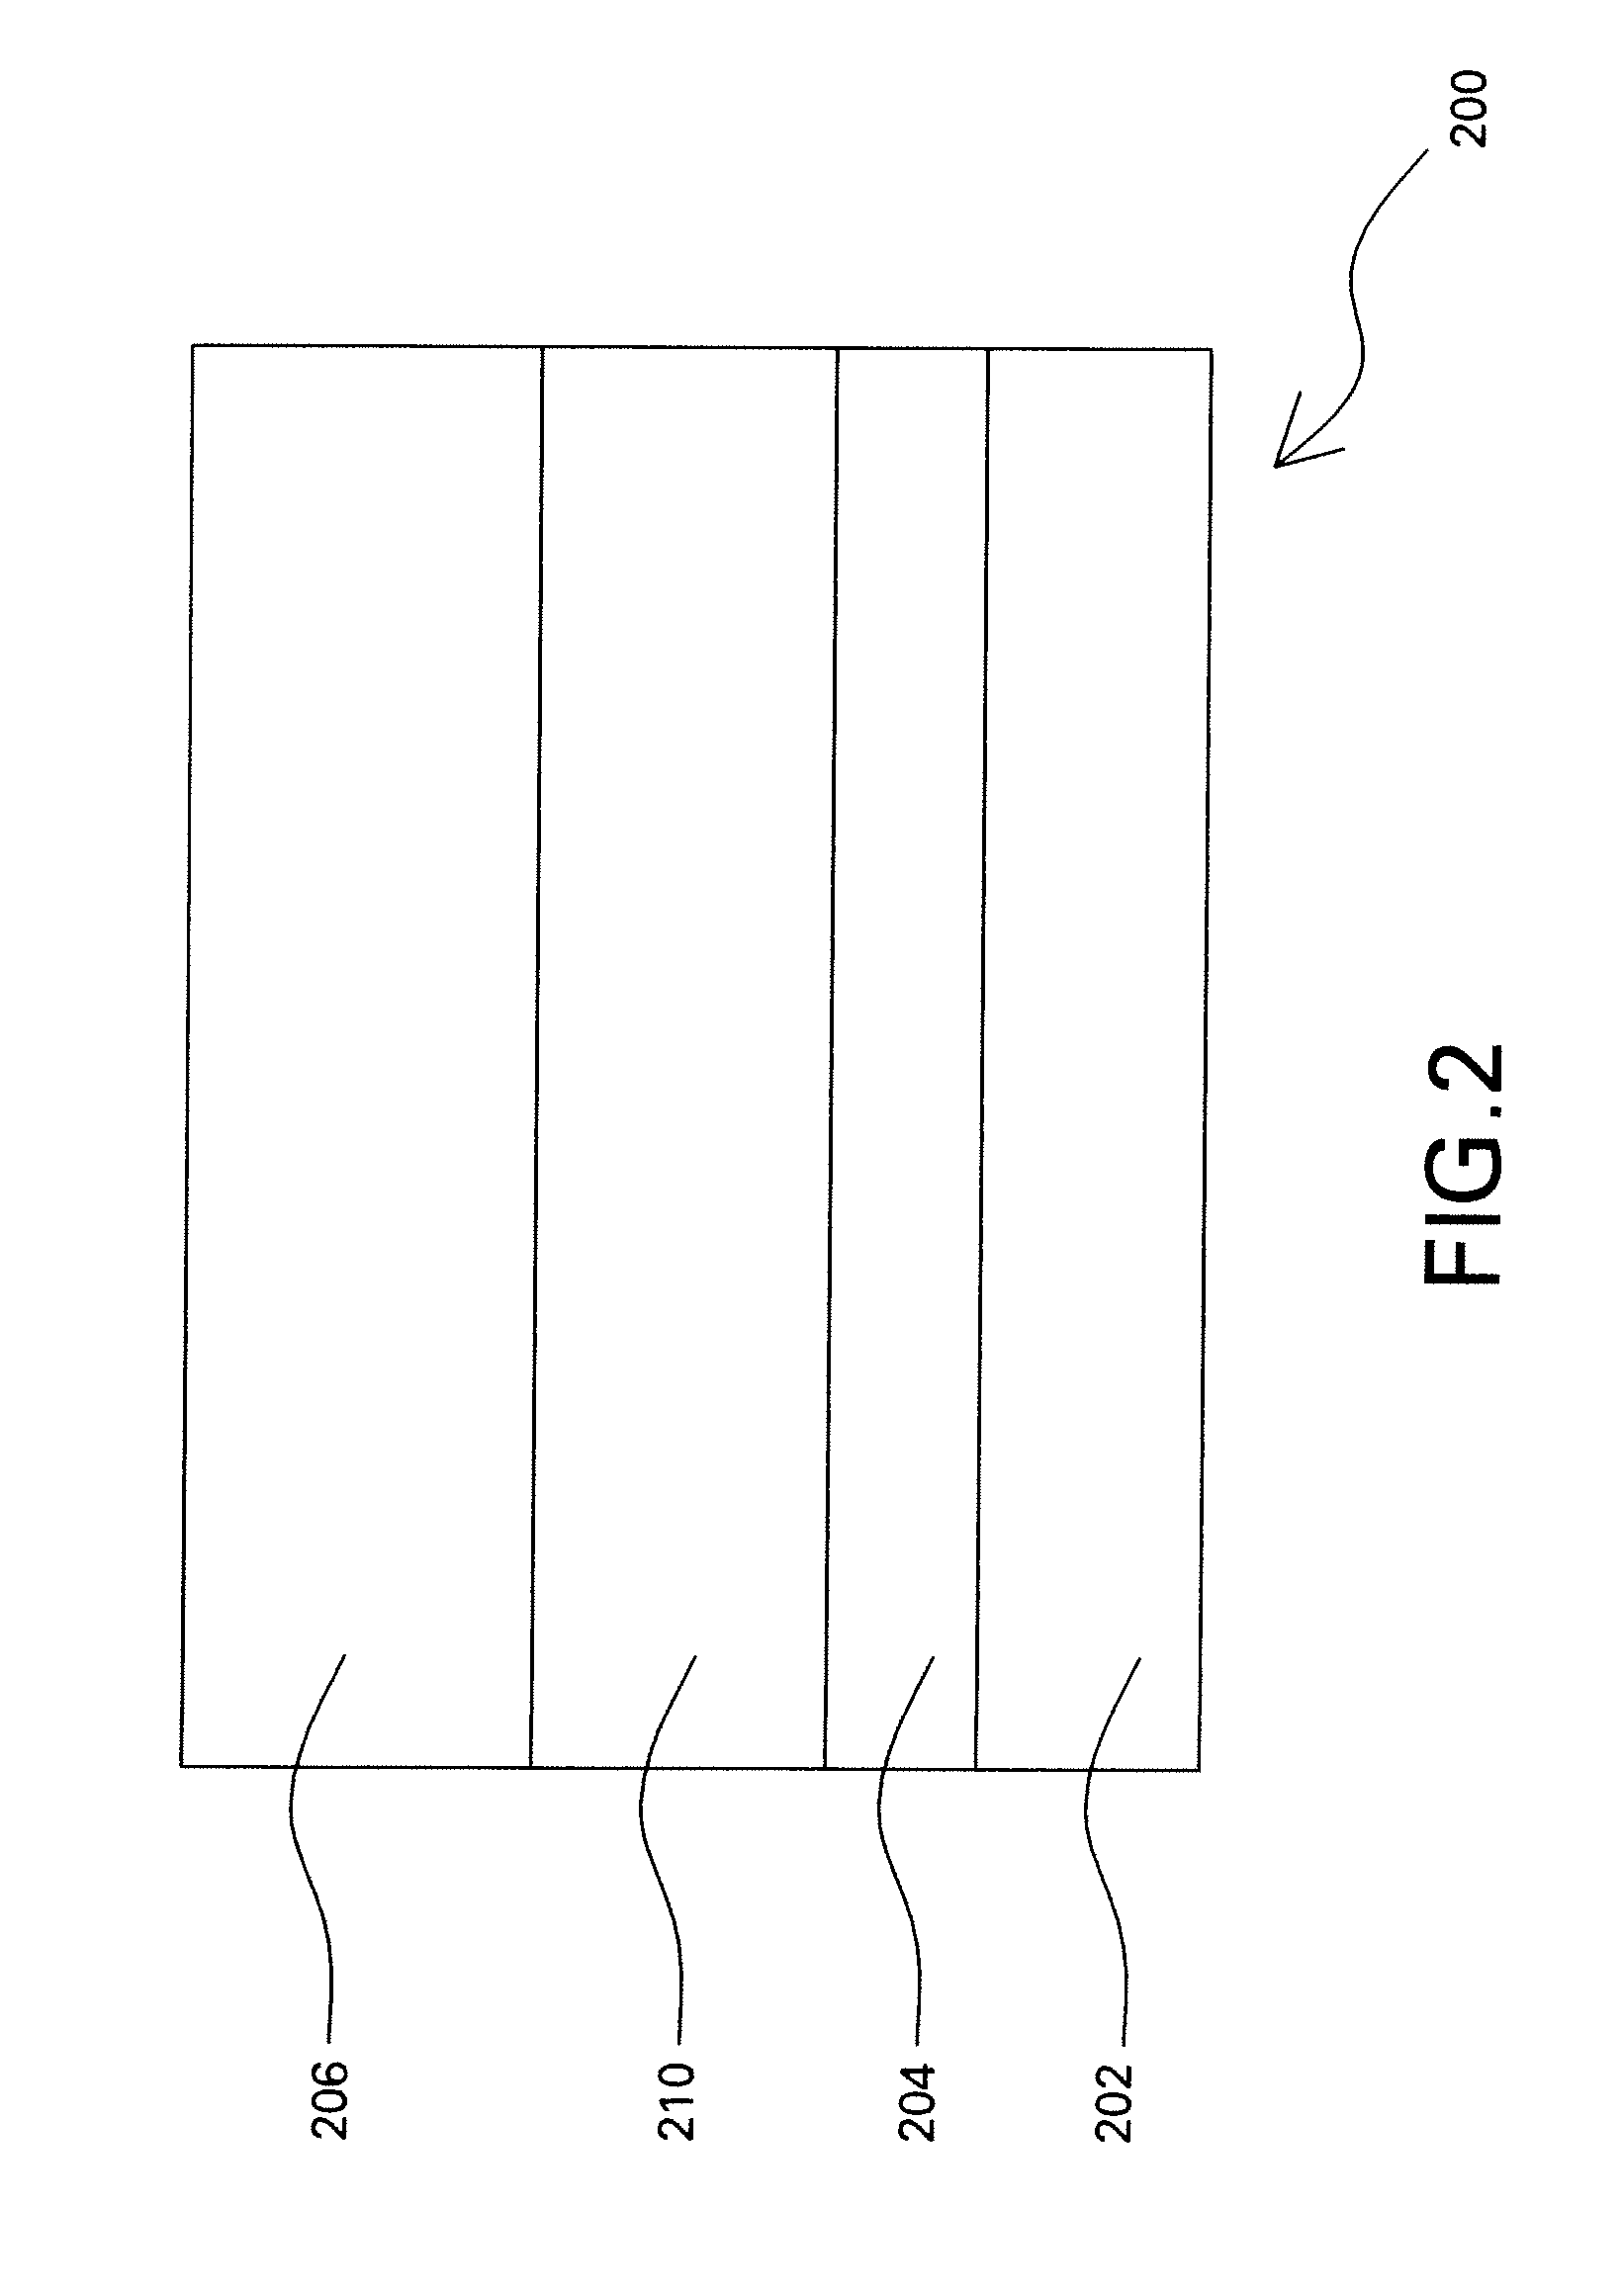 Articles for high temperature service and methods for their manufacture